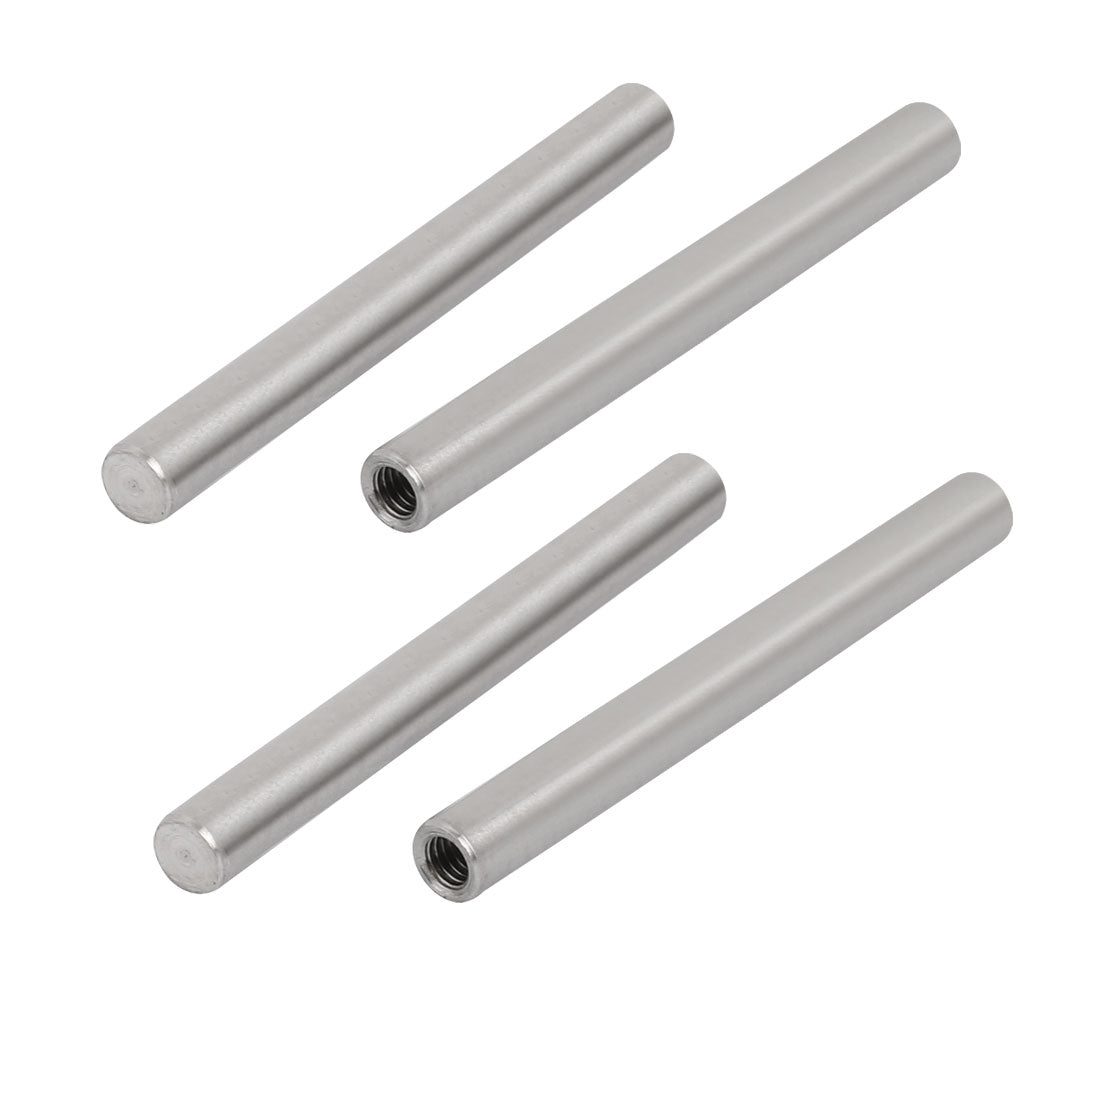 uxcell Uxcell 304 Stainless Steel M4 Female Thread 6mm x 60mm Cylindrical Dowel Pin 4pcs